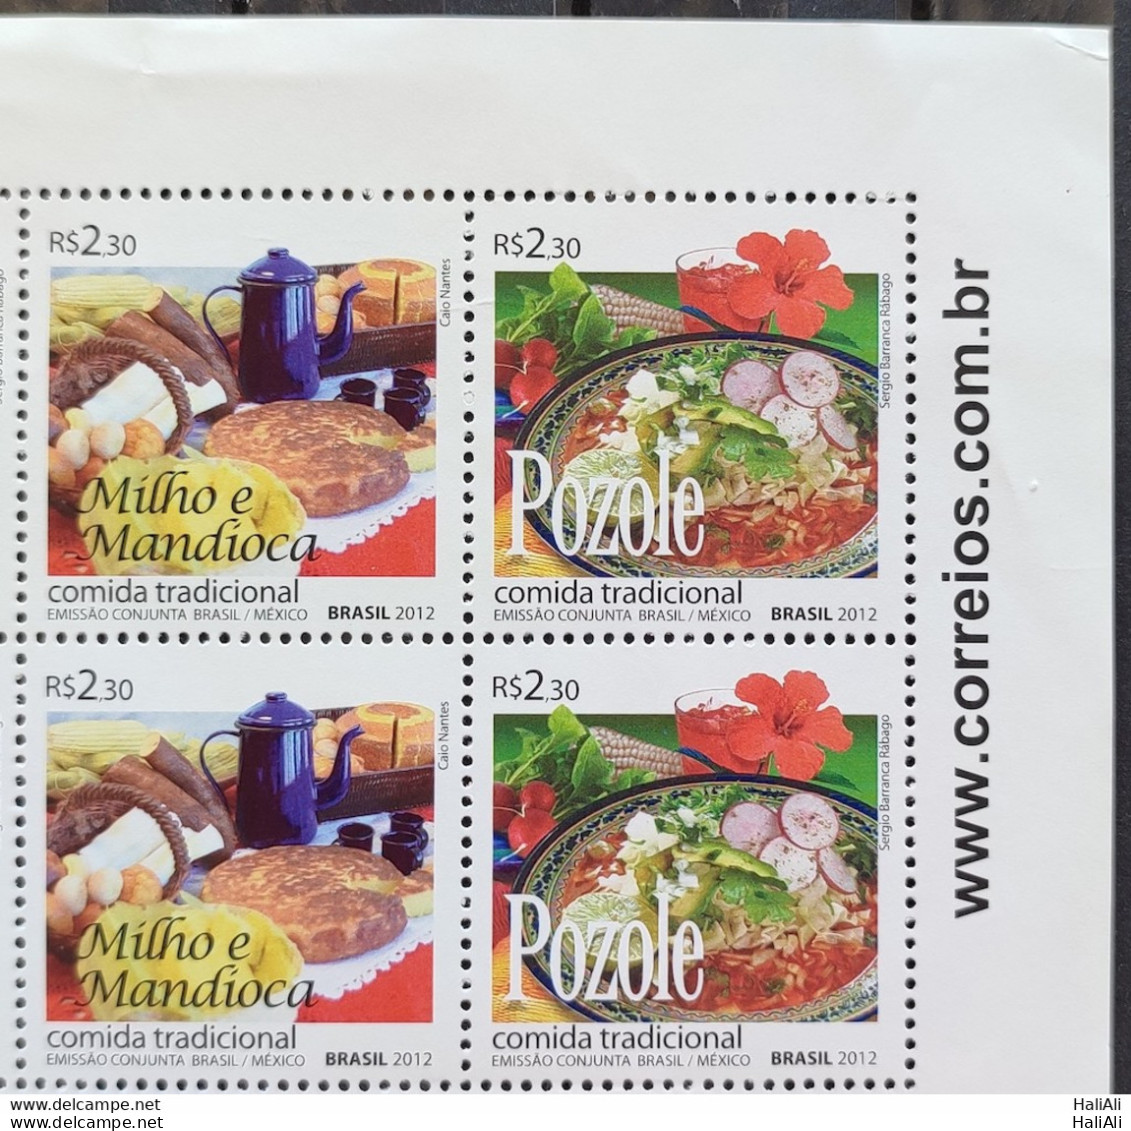 C 3215 Brazil Stamp Diplomatic Relations Mexico Gastronomy 2012 Block Of 4 Vignette Site - Unused Stamps